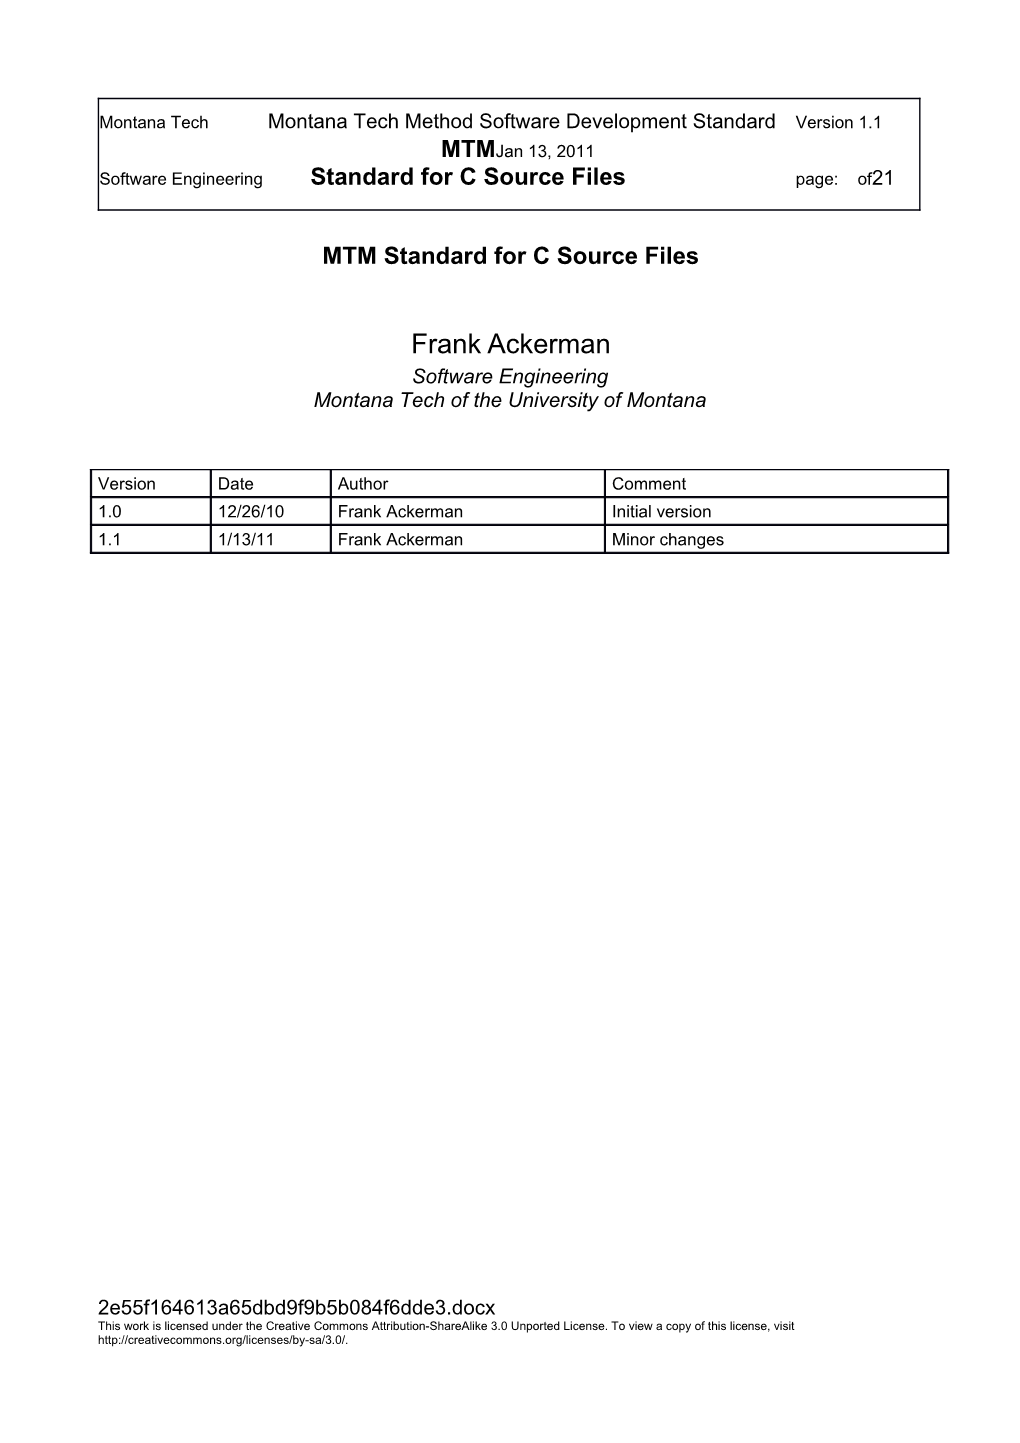 MTM Standard for C Source Files